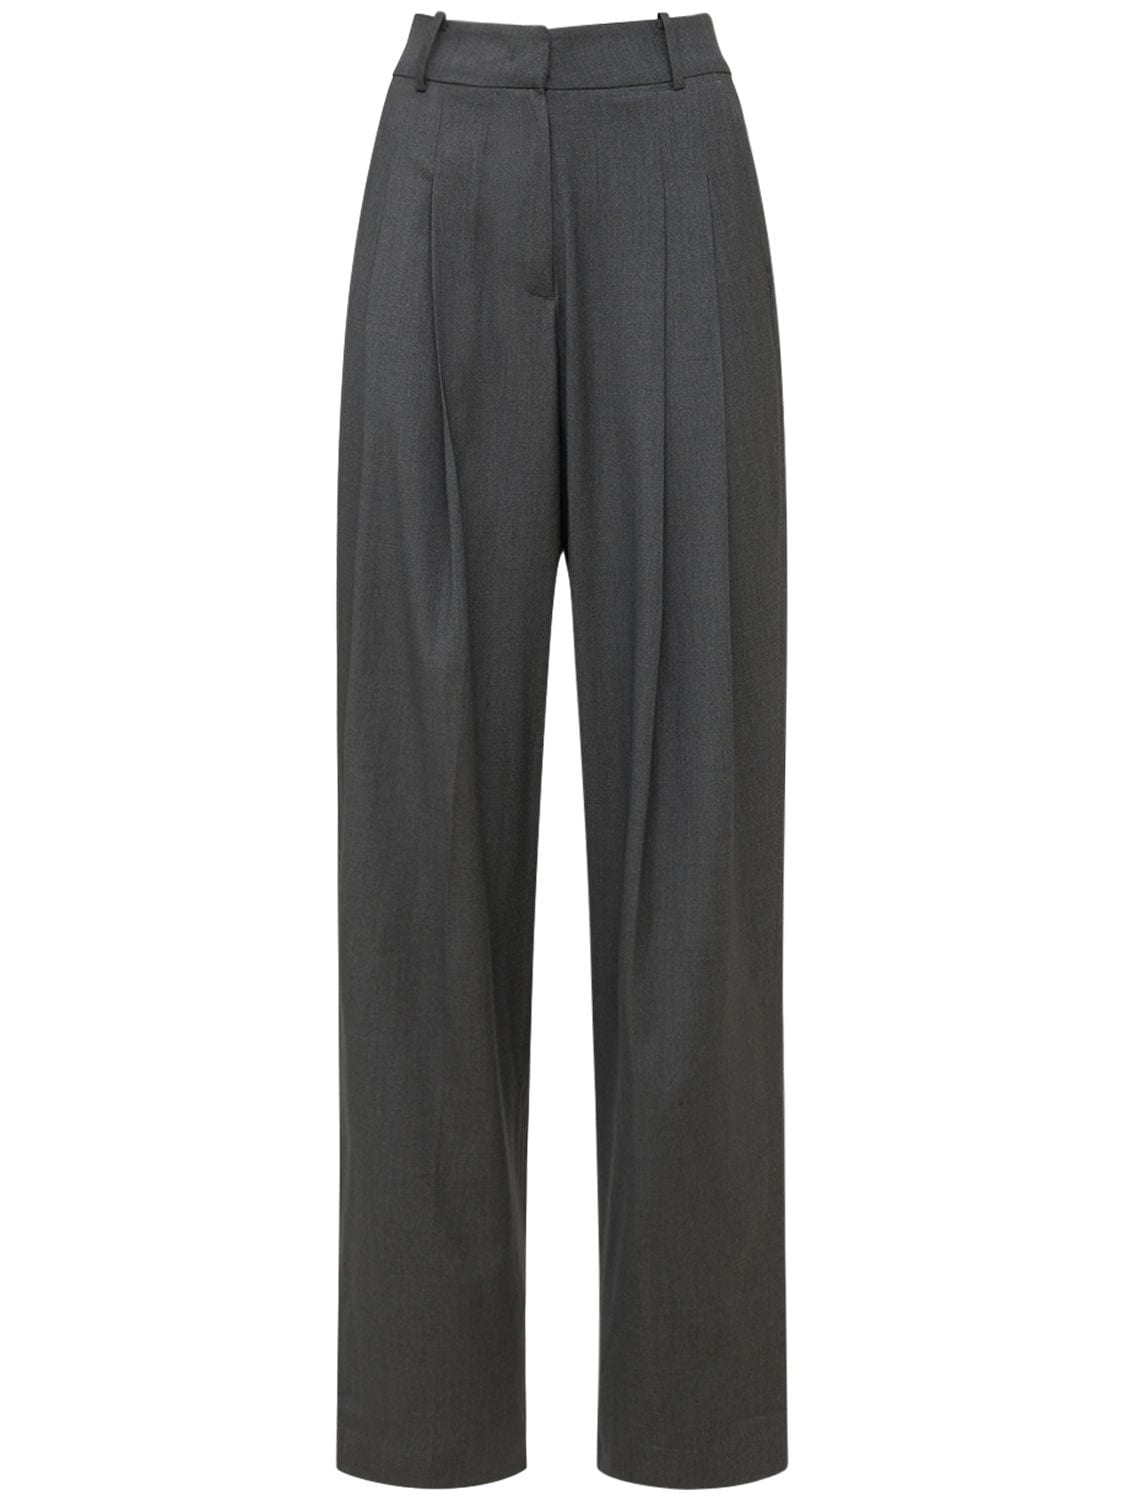 THE FRANKIE SHOP GELSO HIGH RISE PLEATED WOVEN WIDE PANTS